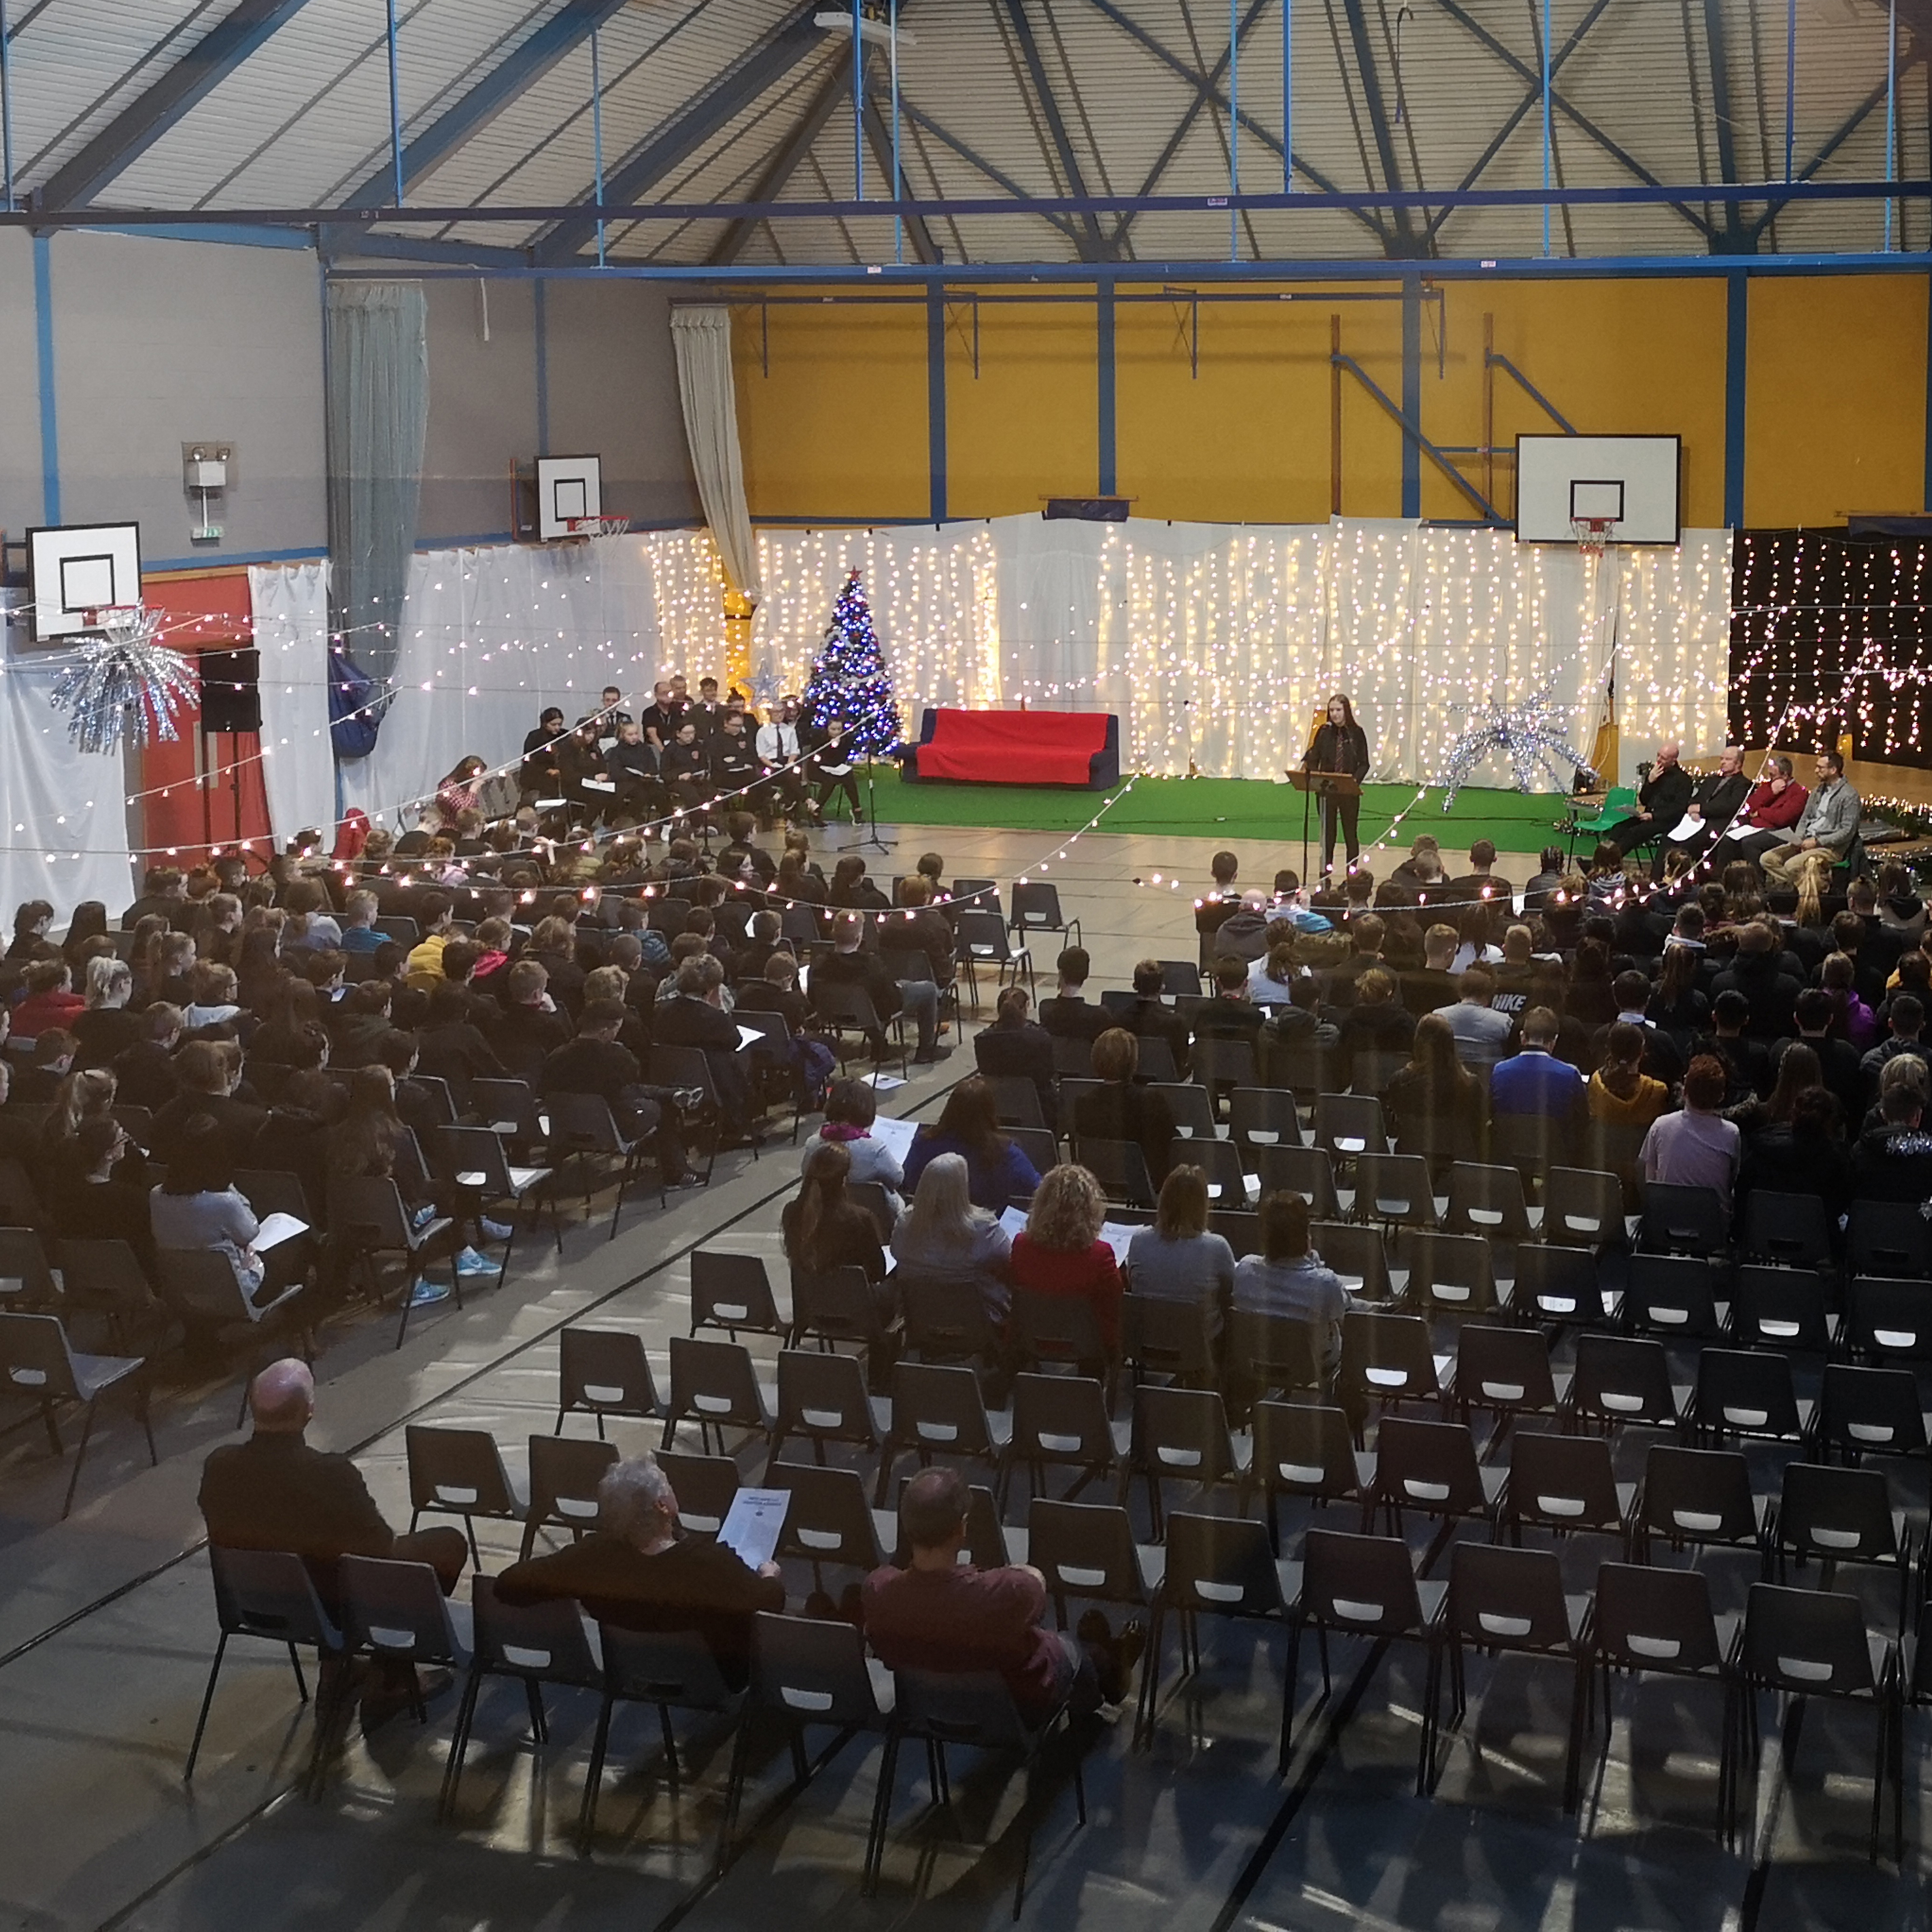 This image is of the school christmas assembly held on Thursday 19th December.